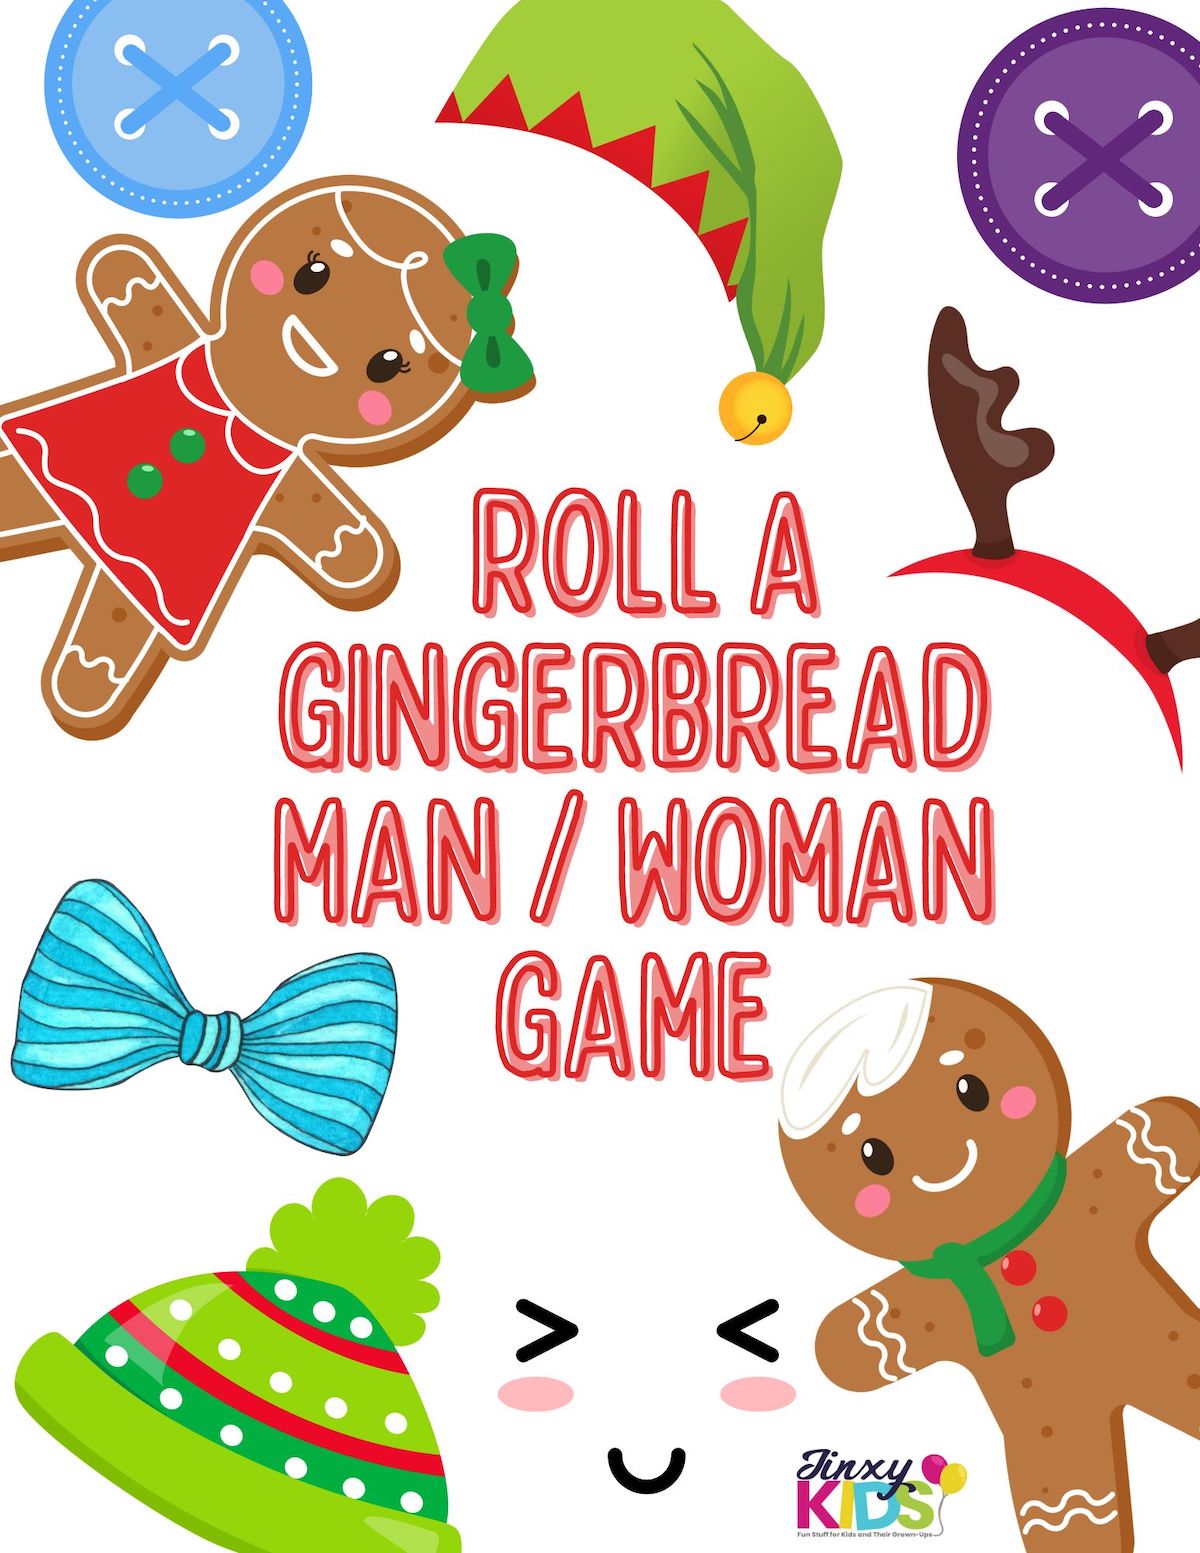 Roll a Gingerbread Man Game.